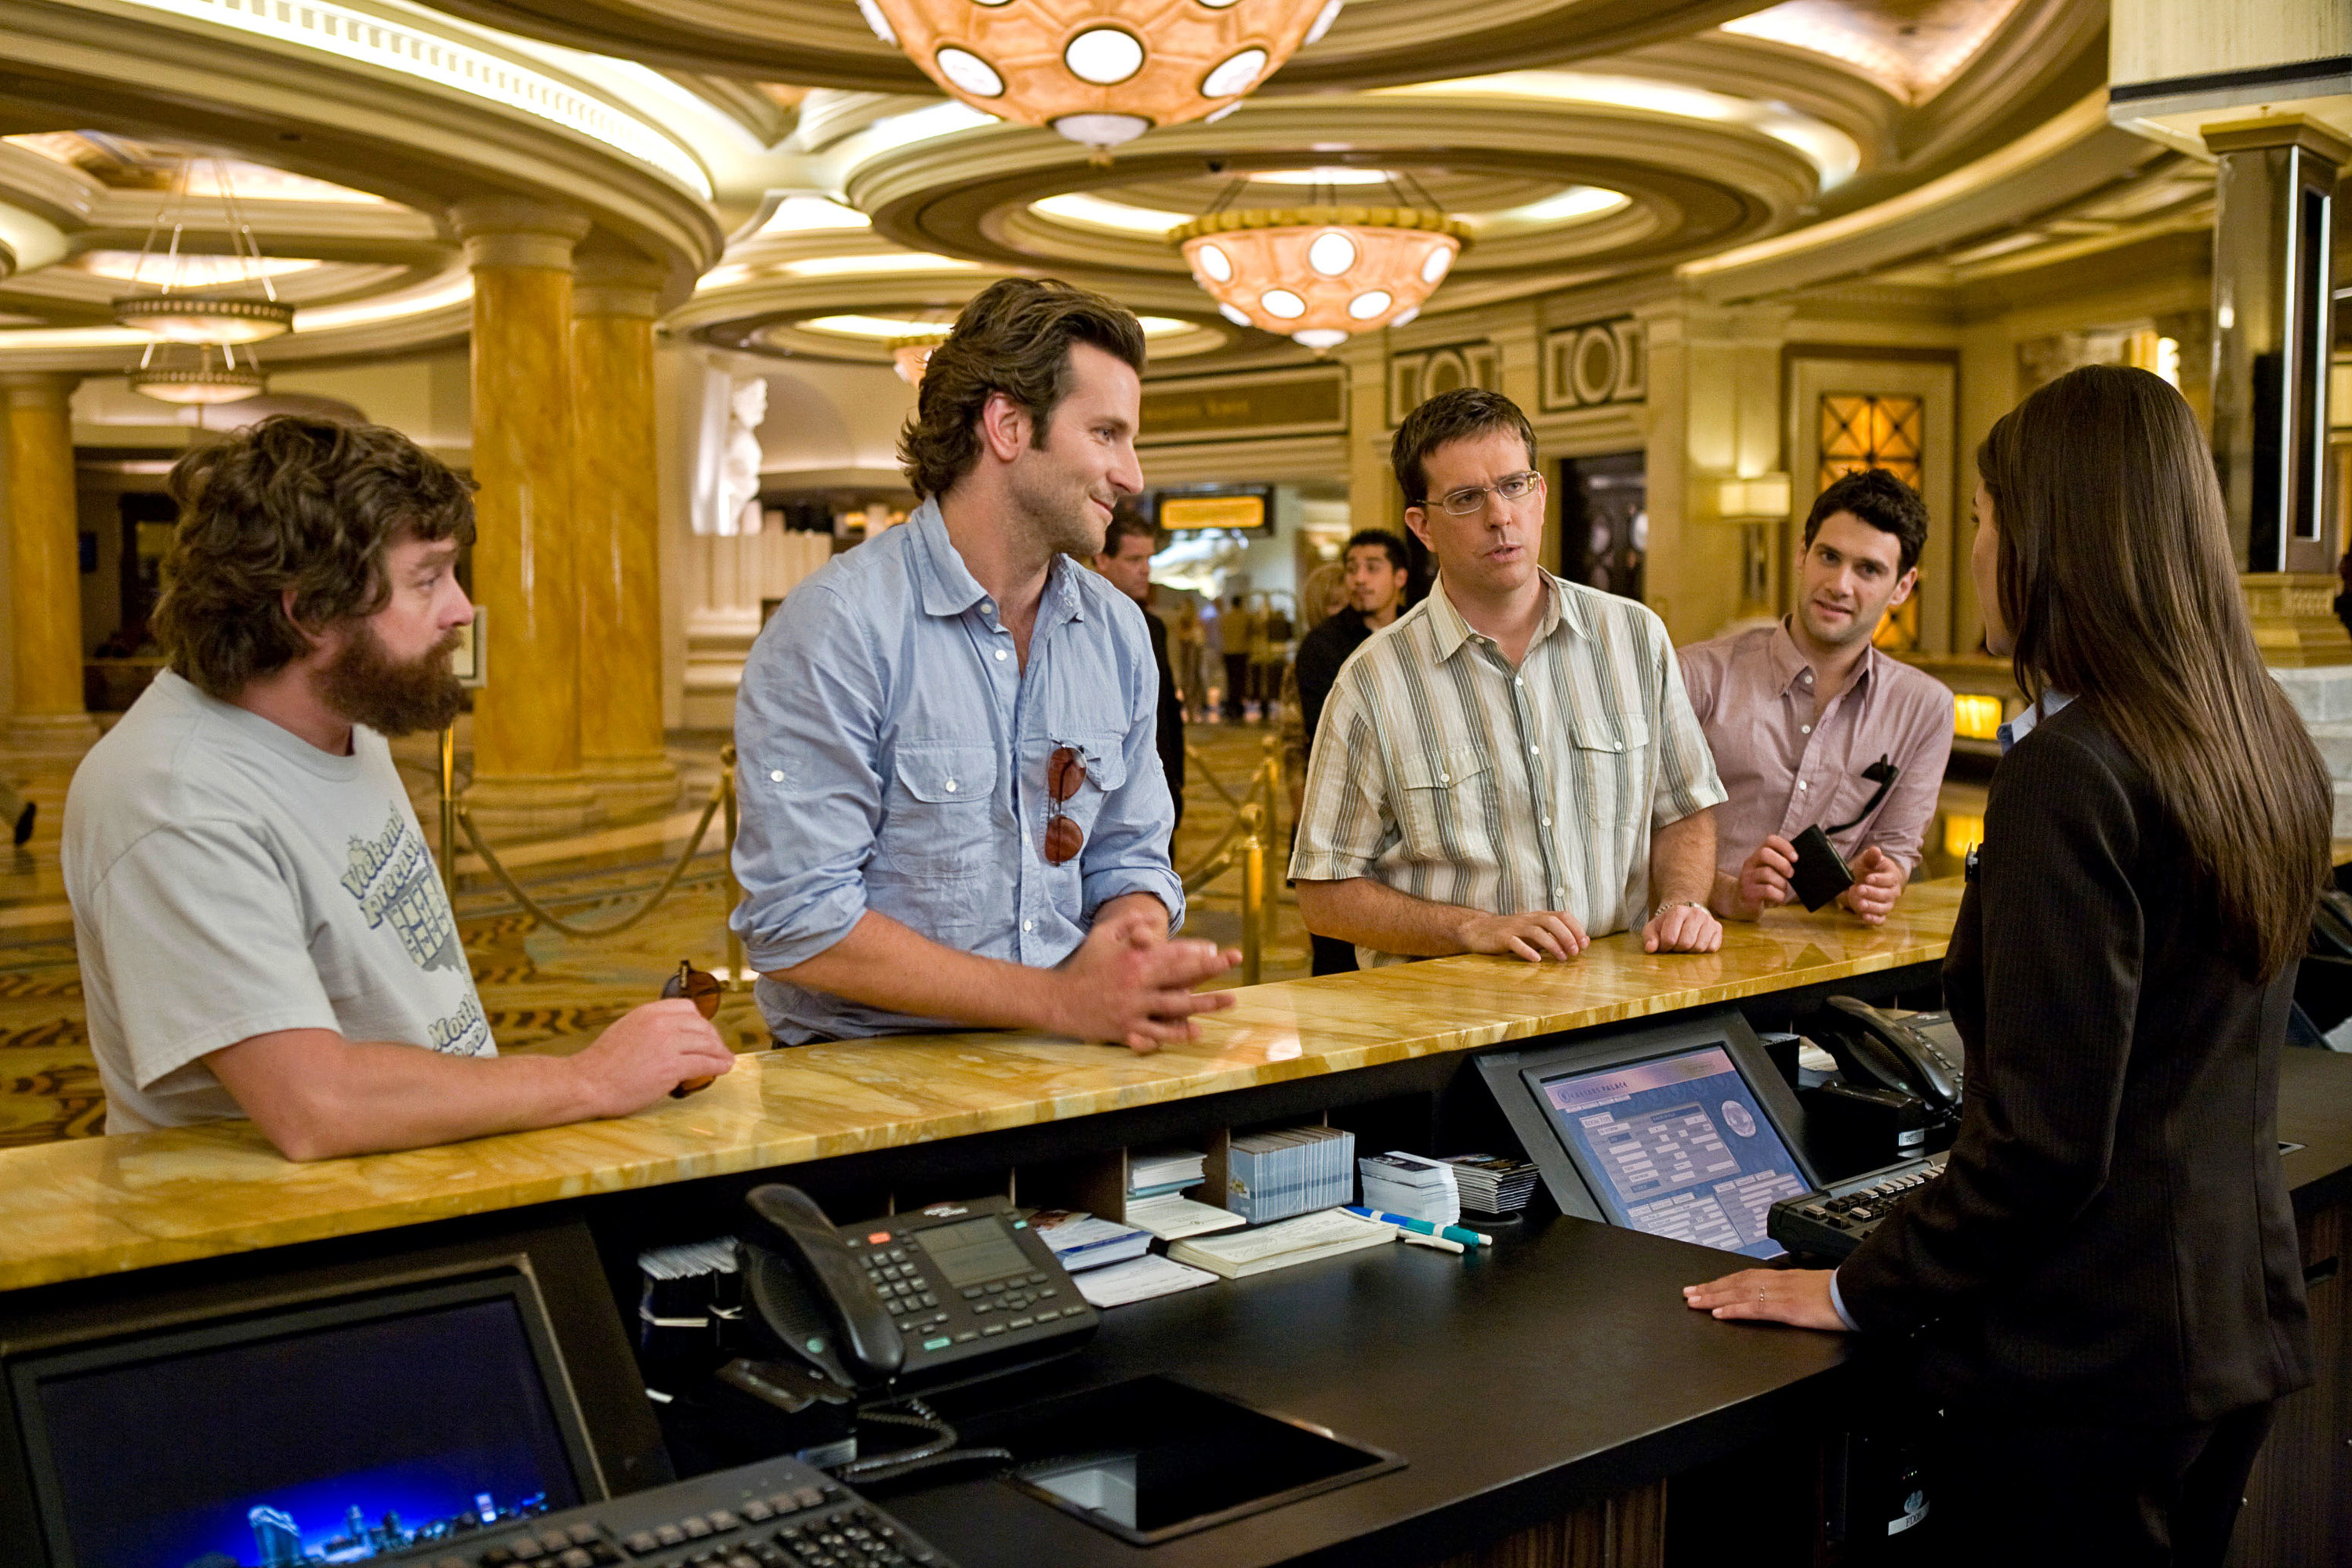 Zach Galifianakis, Bradley Cooper, Ed Helms and Justin Bartha in The Hangover